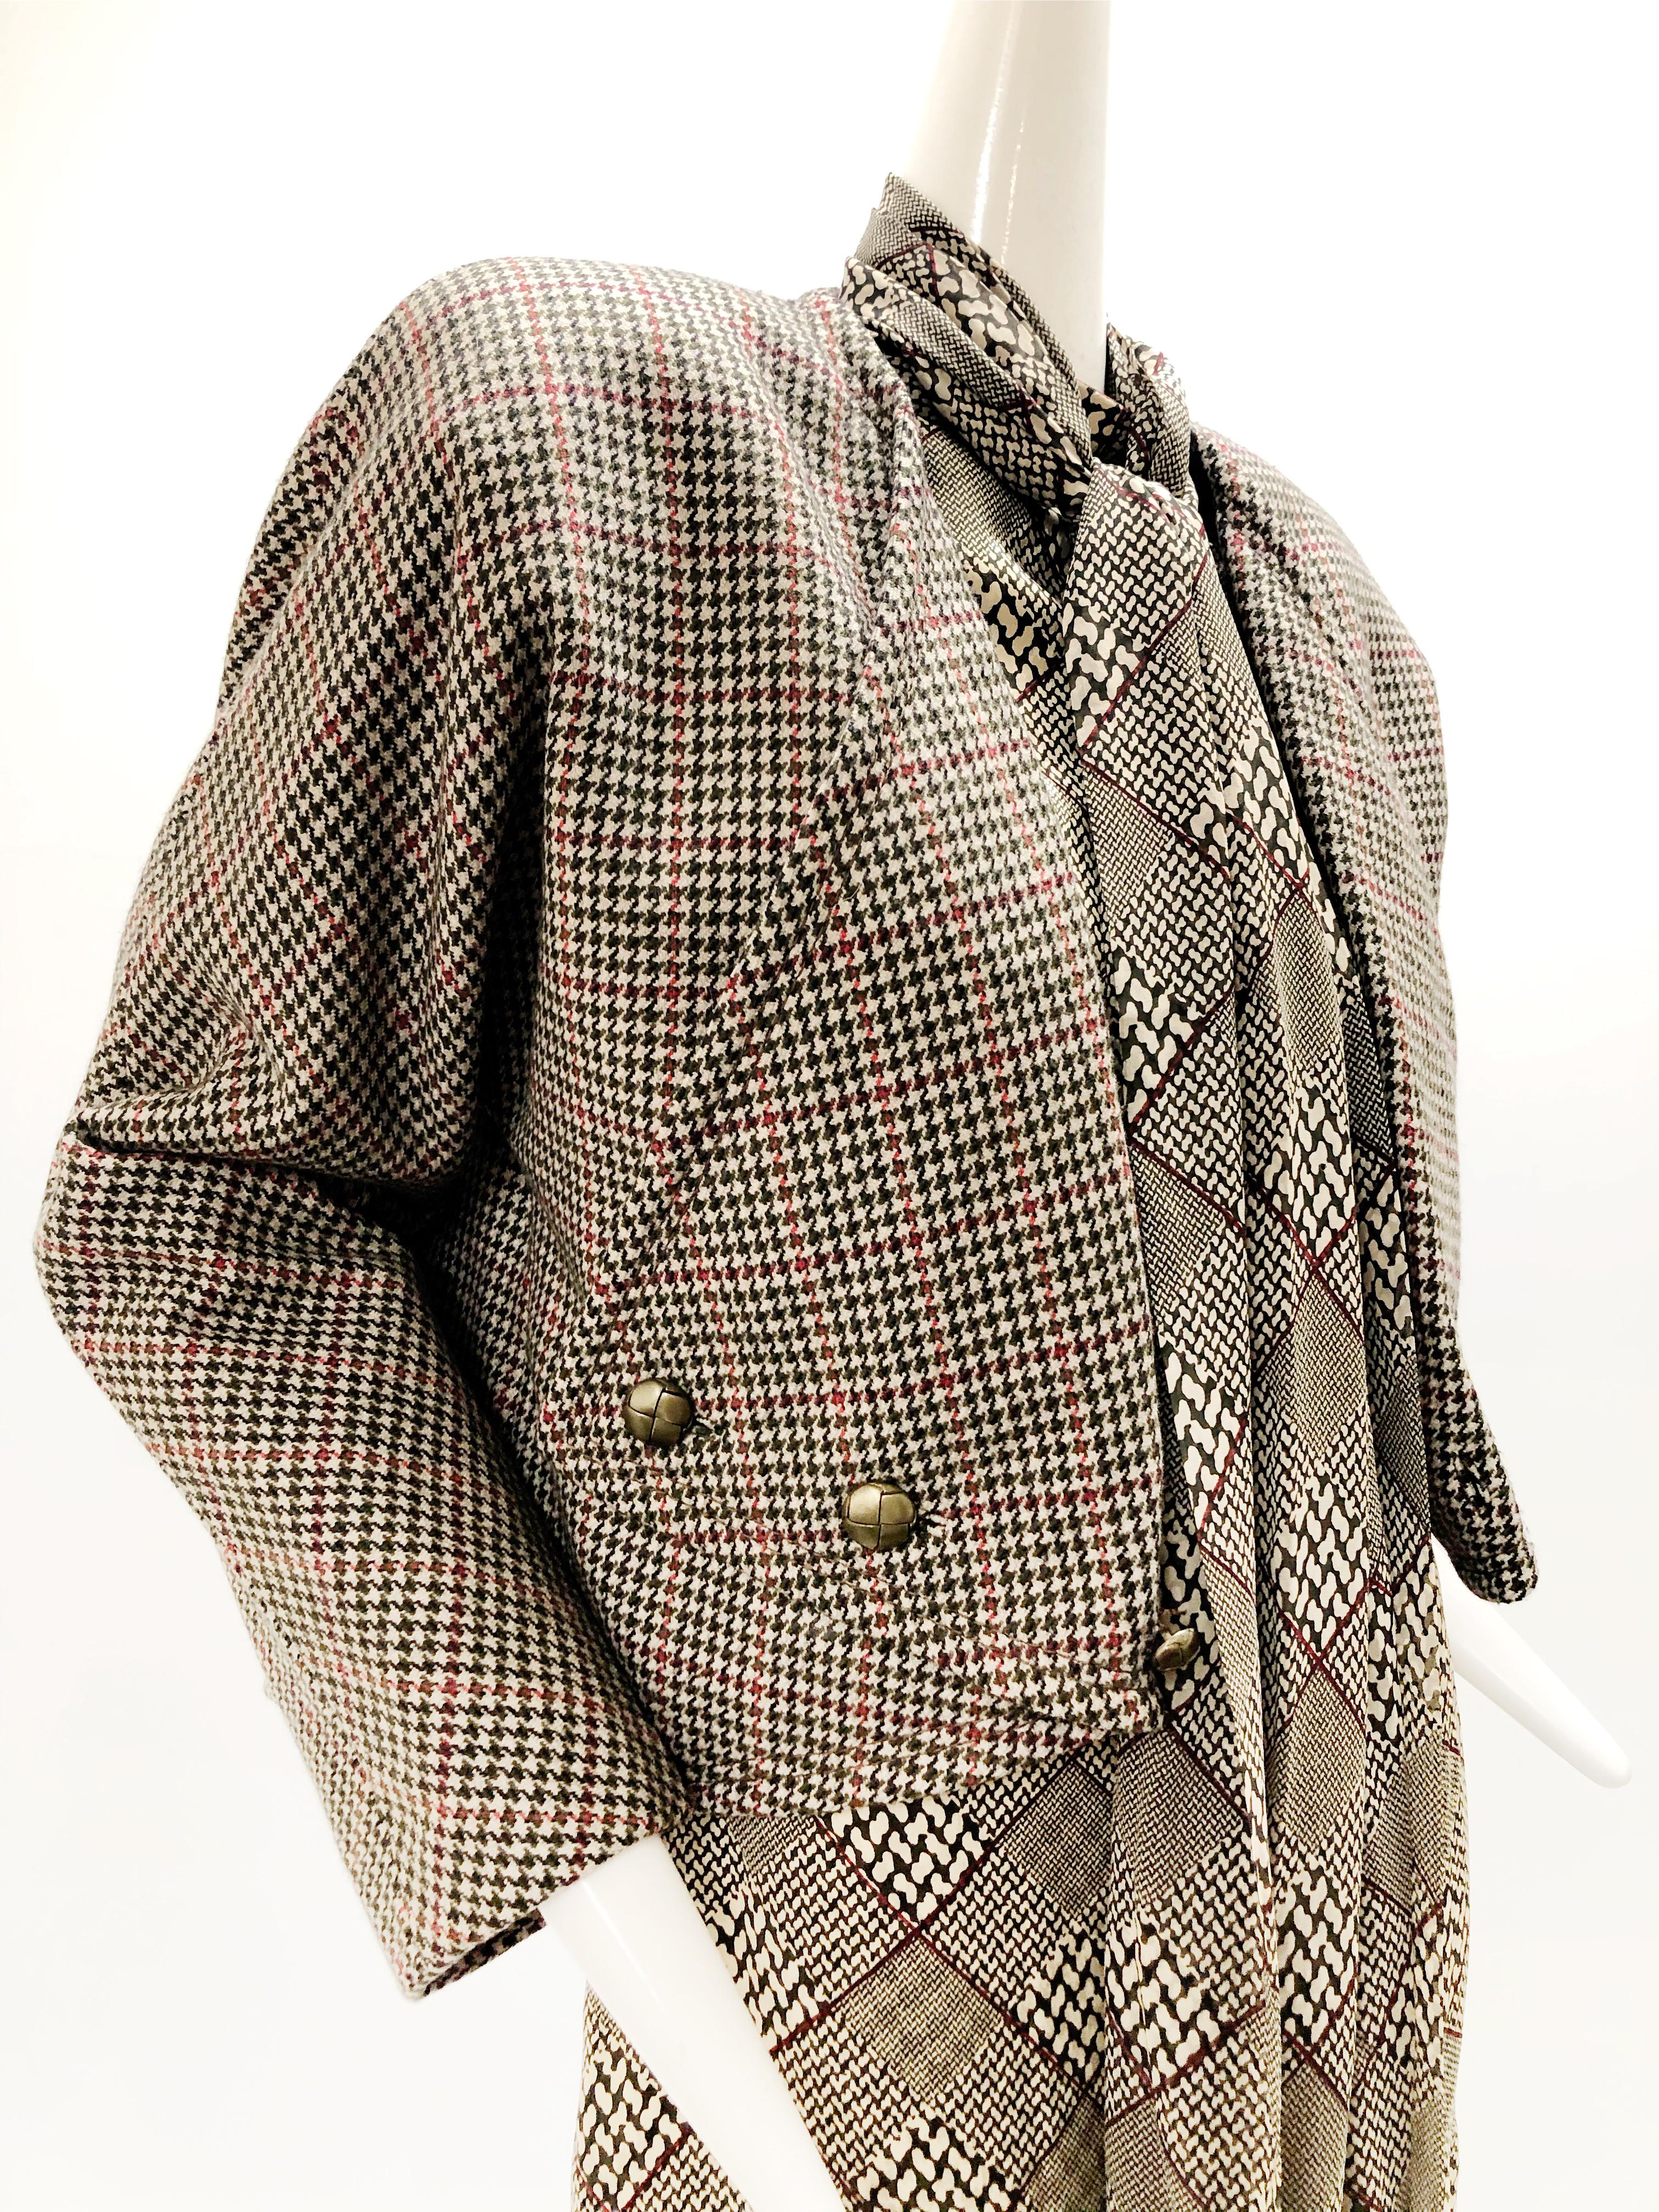 1980s Galanos Silk Dress in a Hounds Tooth Plaid W/ Matching Wool Jacket & Scarf For Sale 9